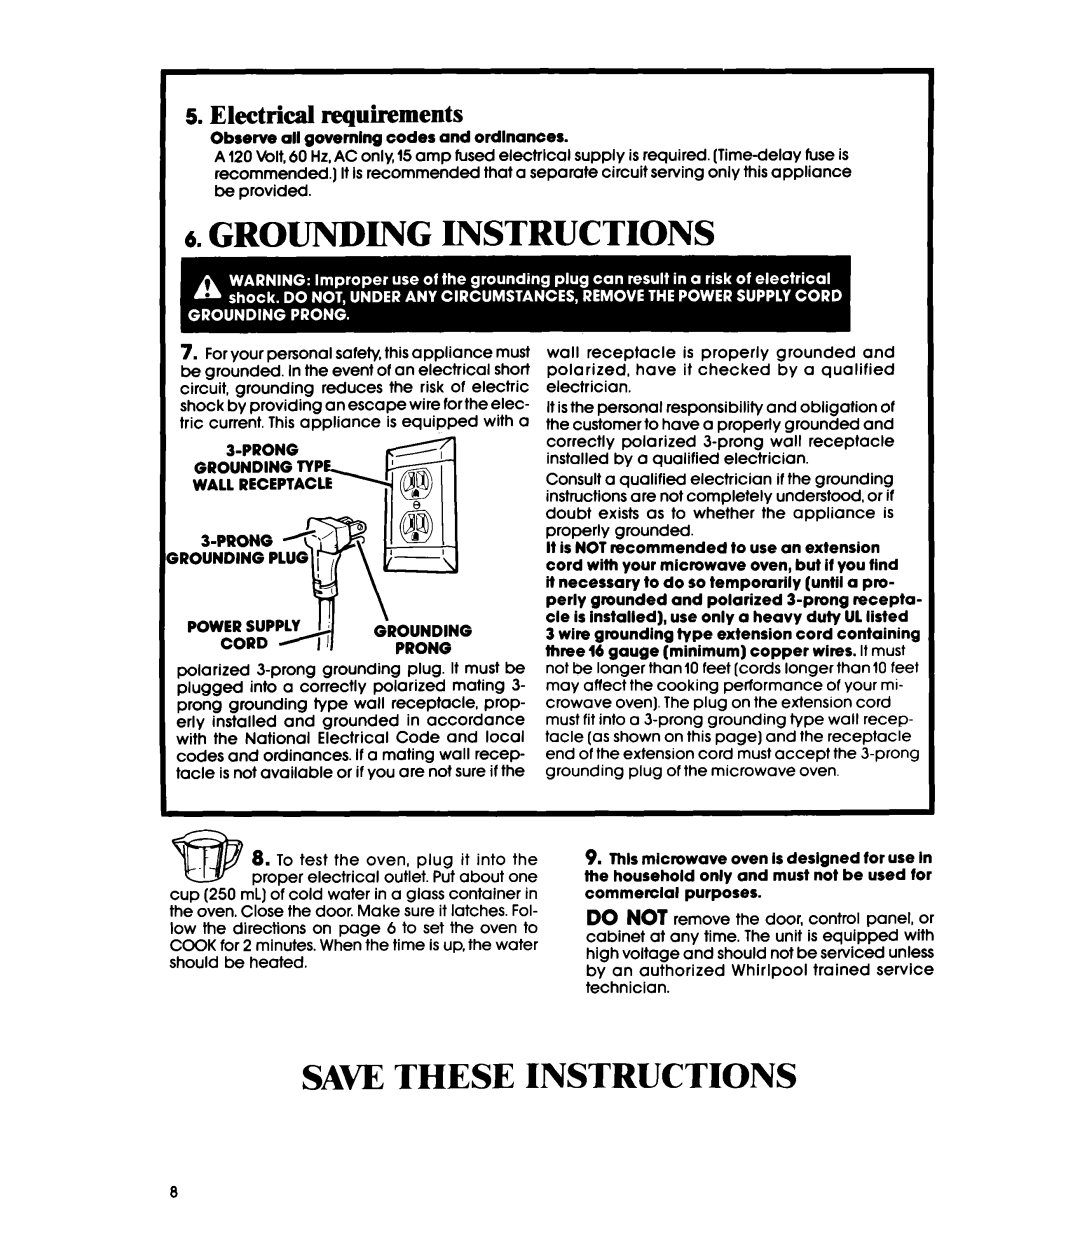 Whirlpool MW1200XS manual Grounding Instructions ‘, Saw These Instructions, Electrical requirements 